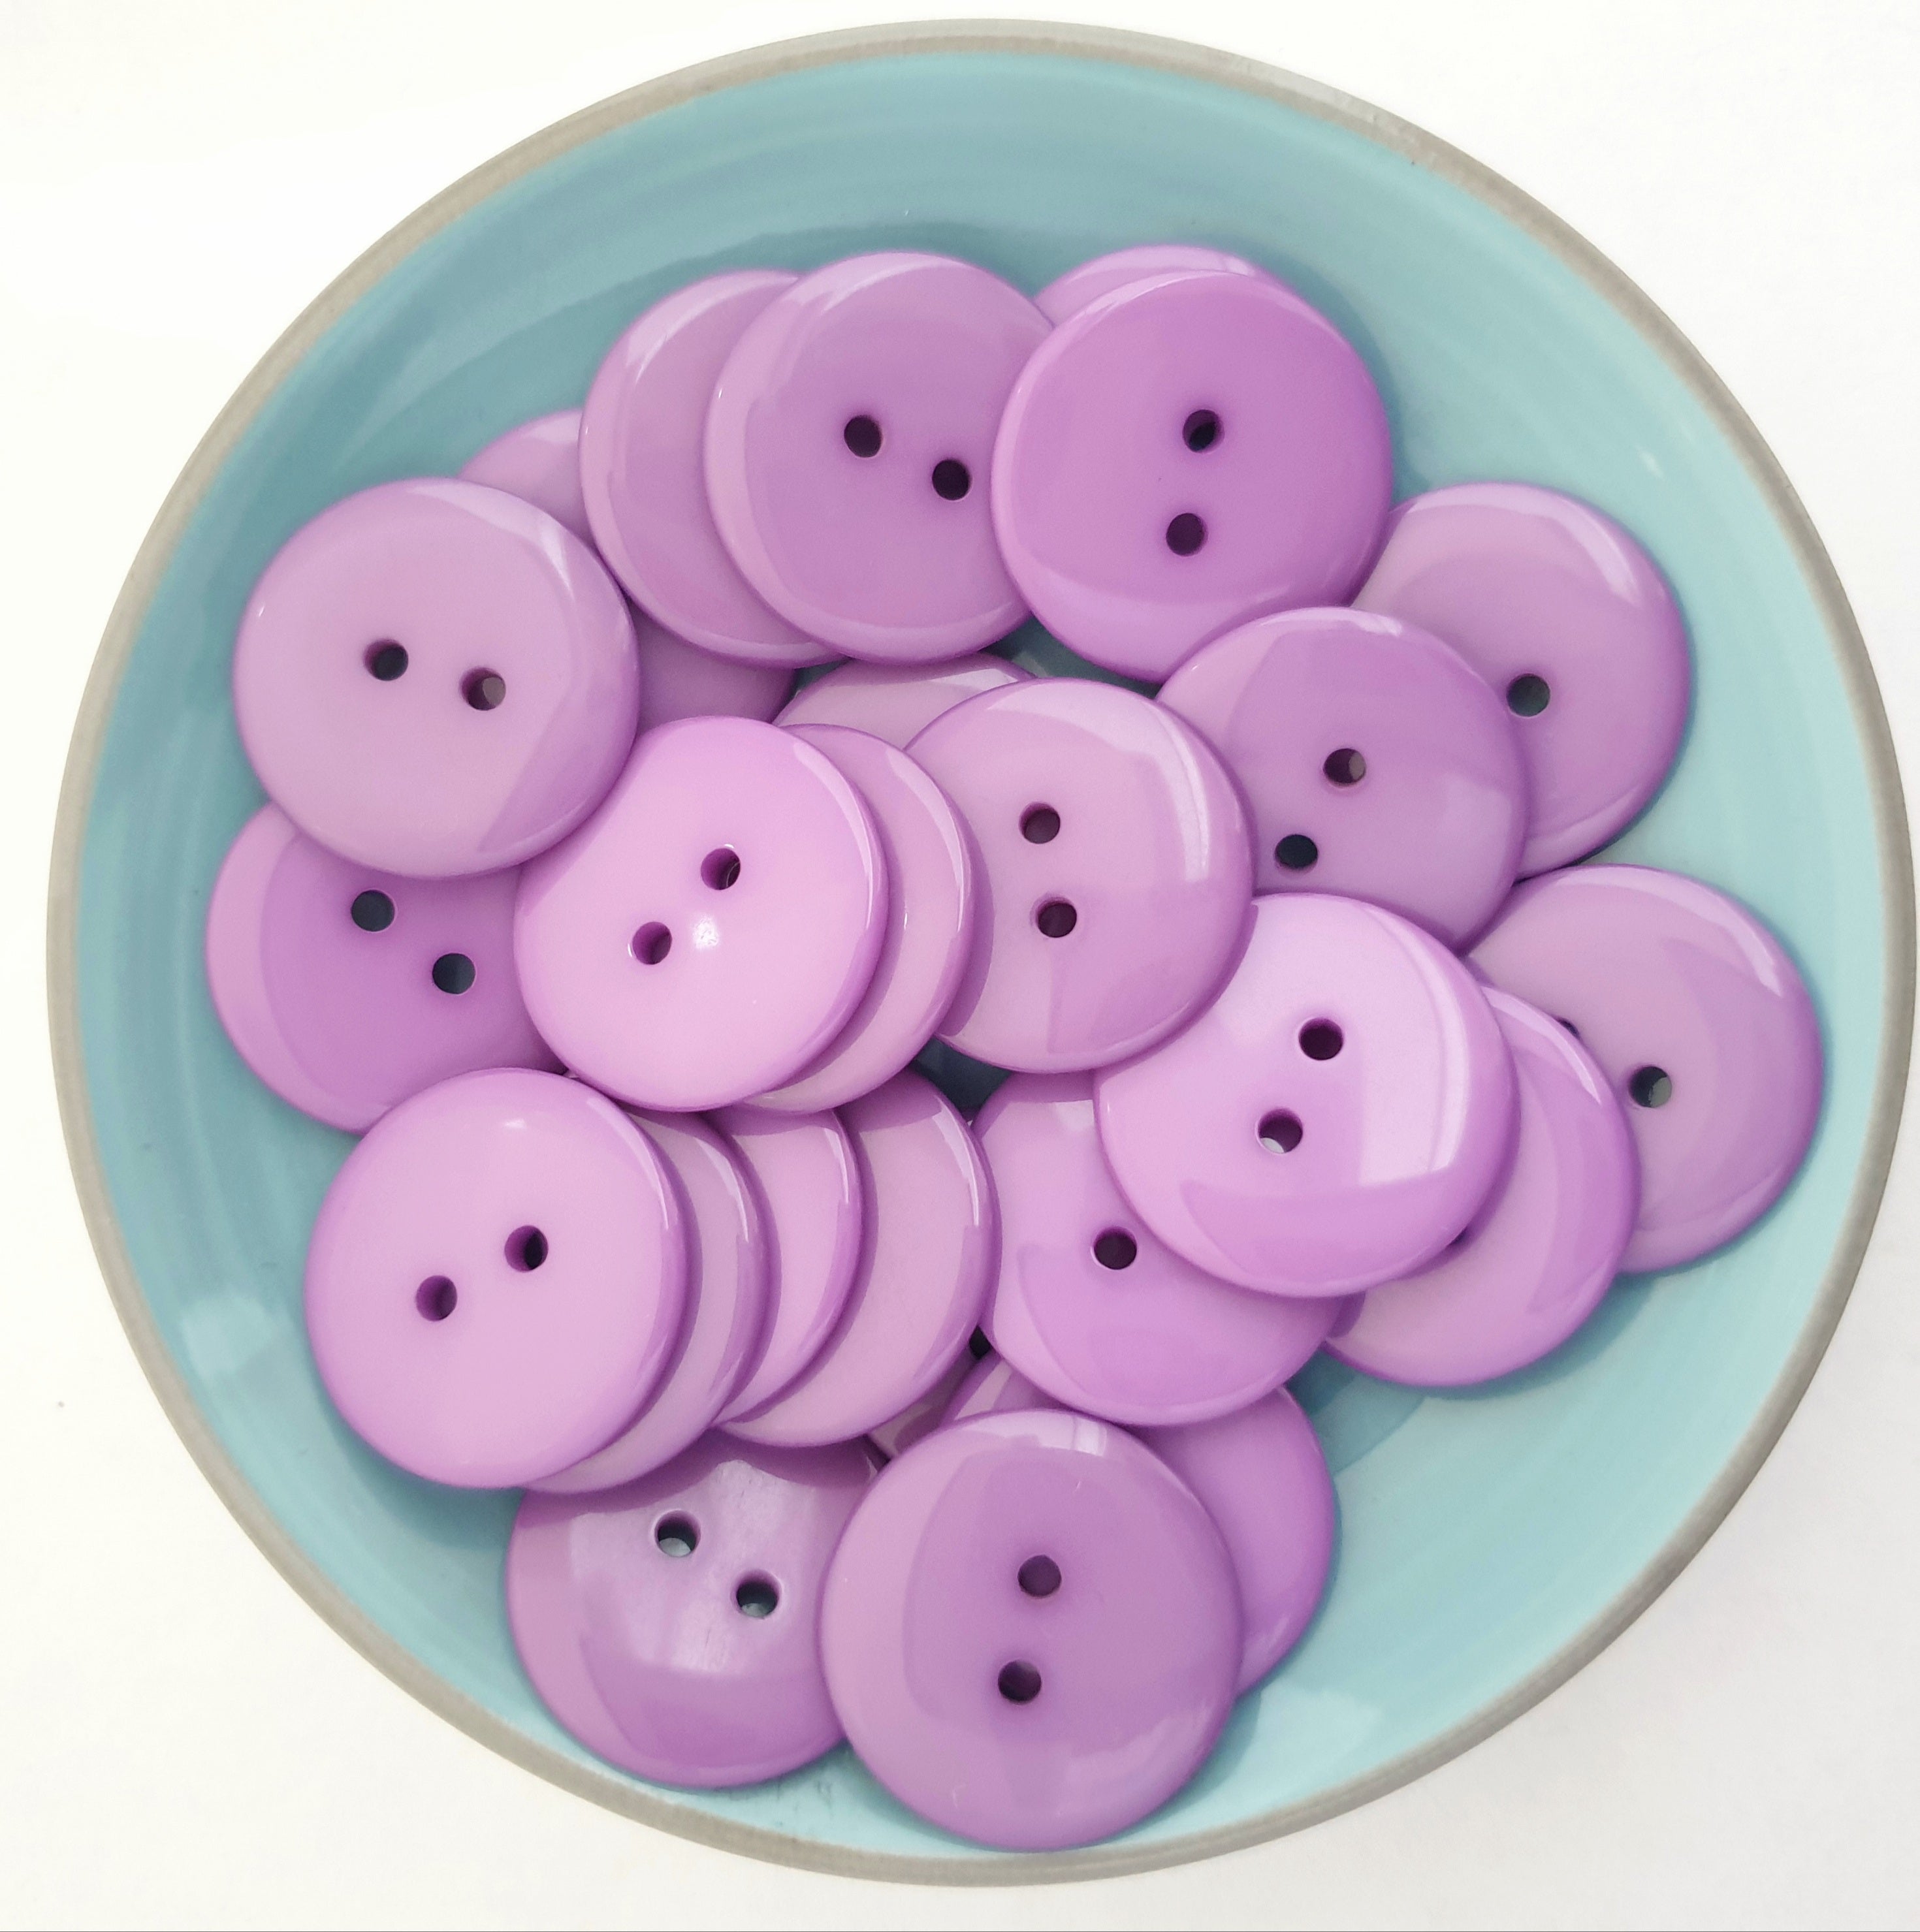 MajorCrafts 36pcs 23mm Purple 2 Holes Round Large Resin Sewing Buttons